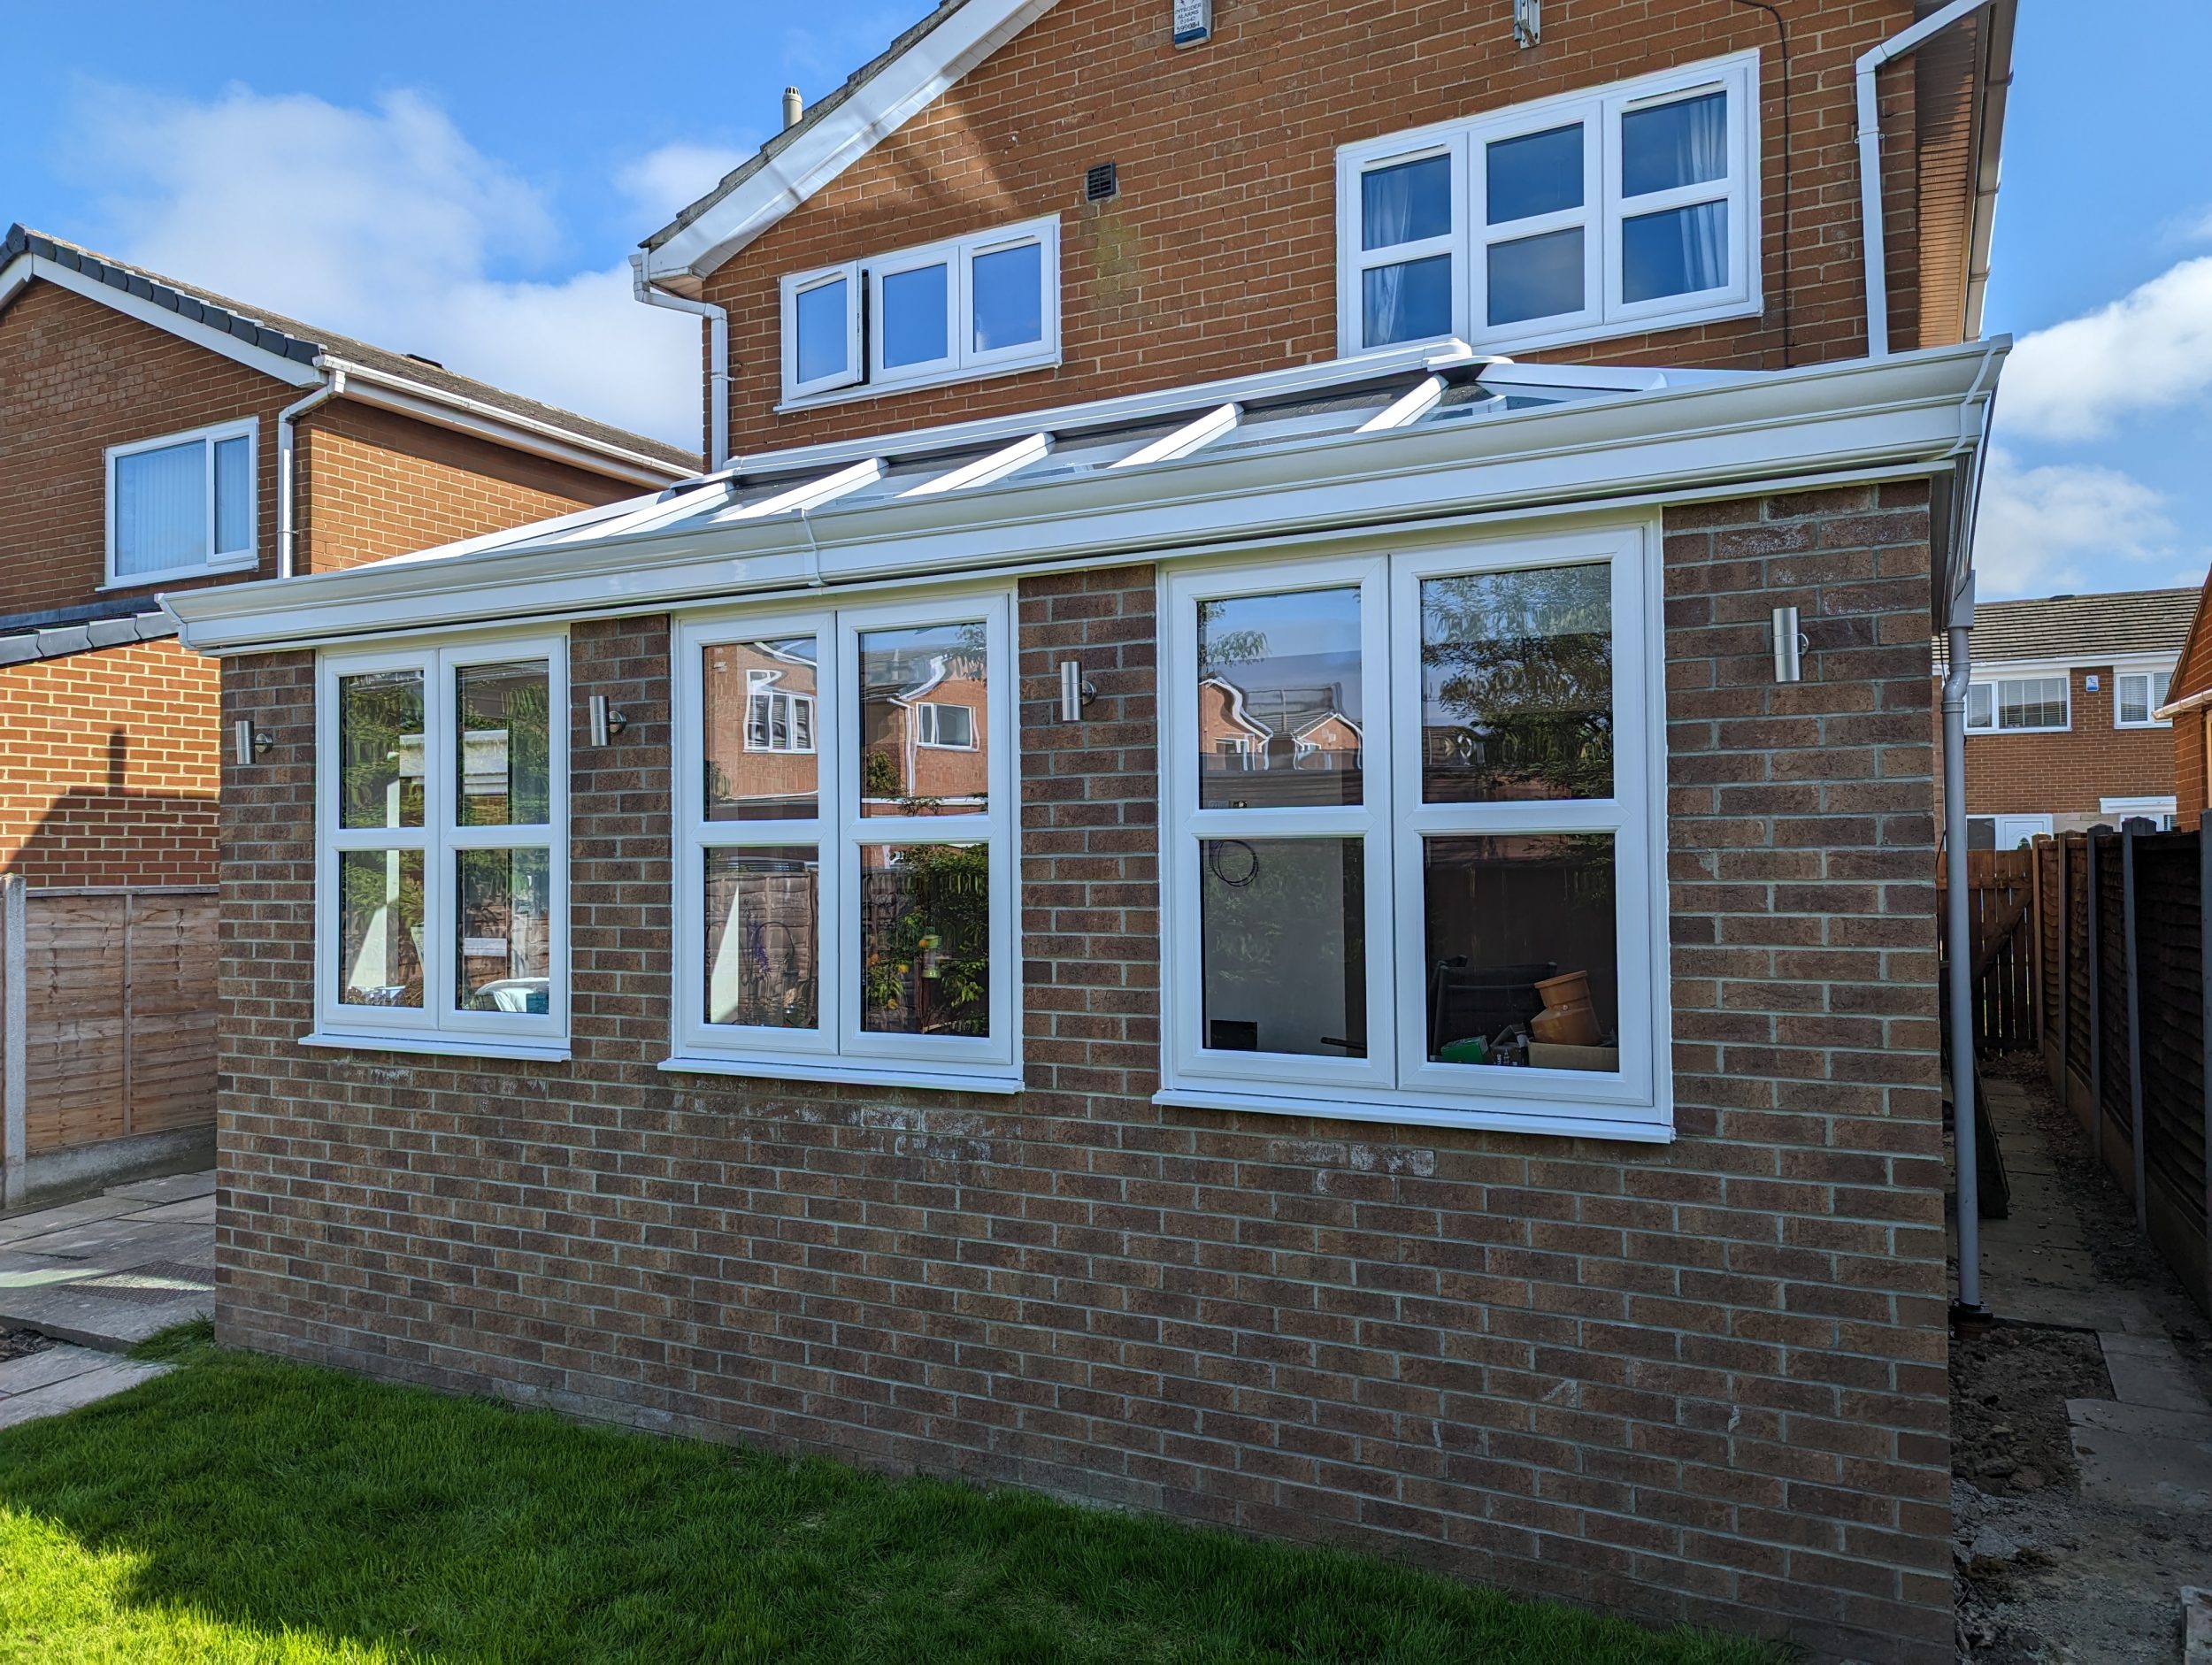 Modern orangery from Enhance conservatories in north east england.